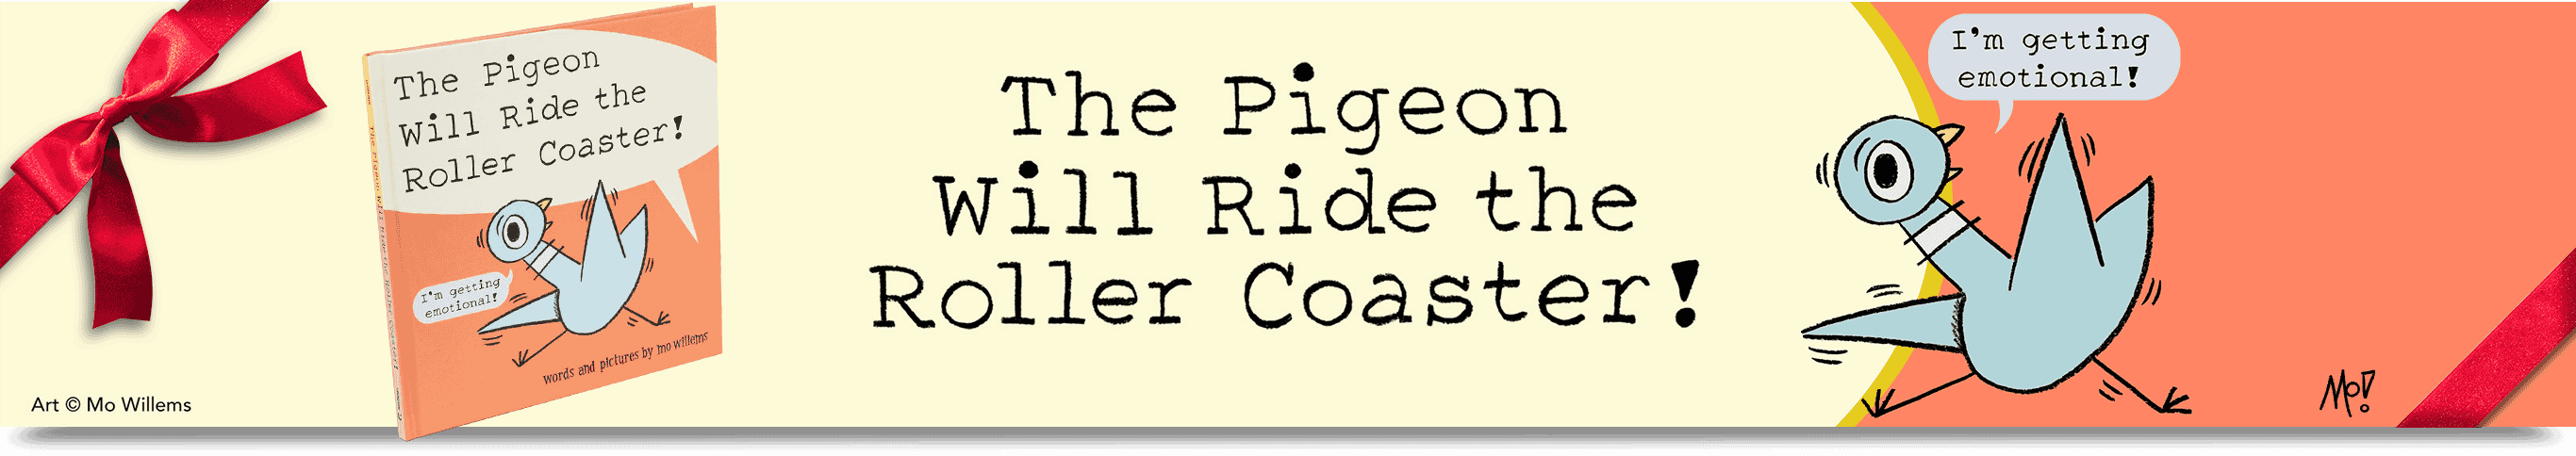 Mo Willems. The Pigeon Will Ride The Roller Coaster!